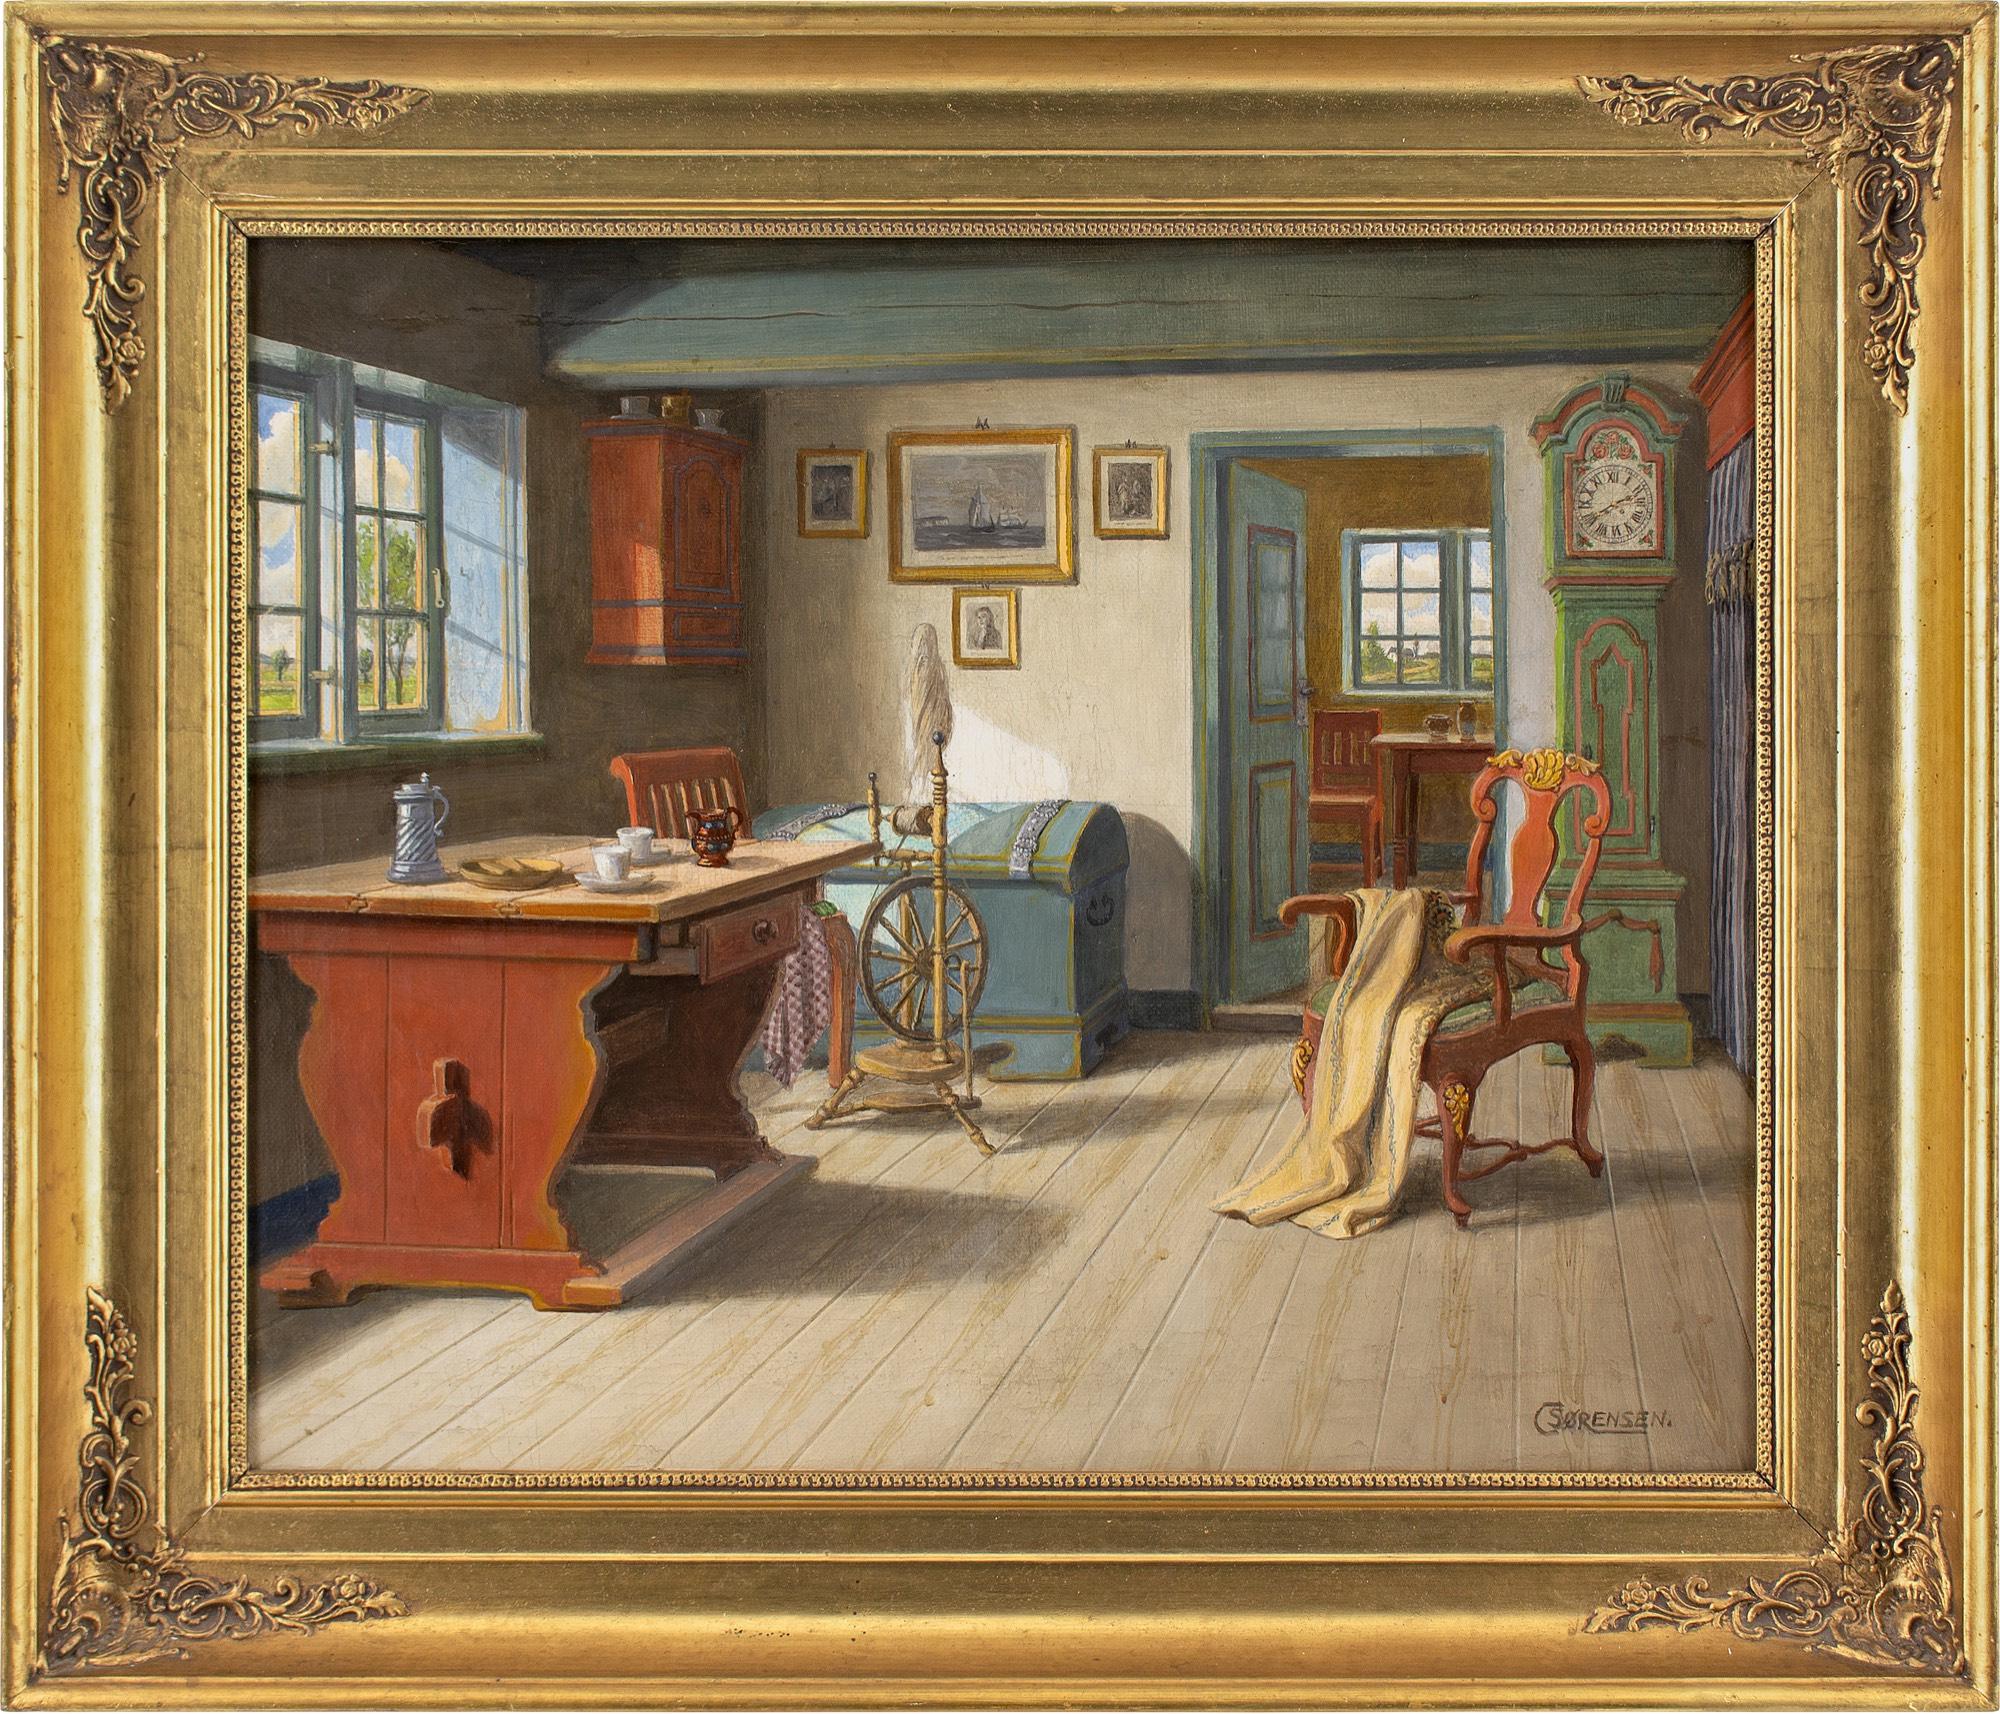 This early 20th-century oil painting by Danish artist C Sorensen depicts a rustic interior with table, spinning wheel, chair, clock, and chest.

Little is known about C Sørensen, which is unusual given their evident skill. They worked predominantly